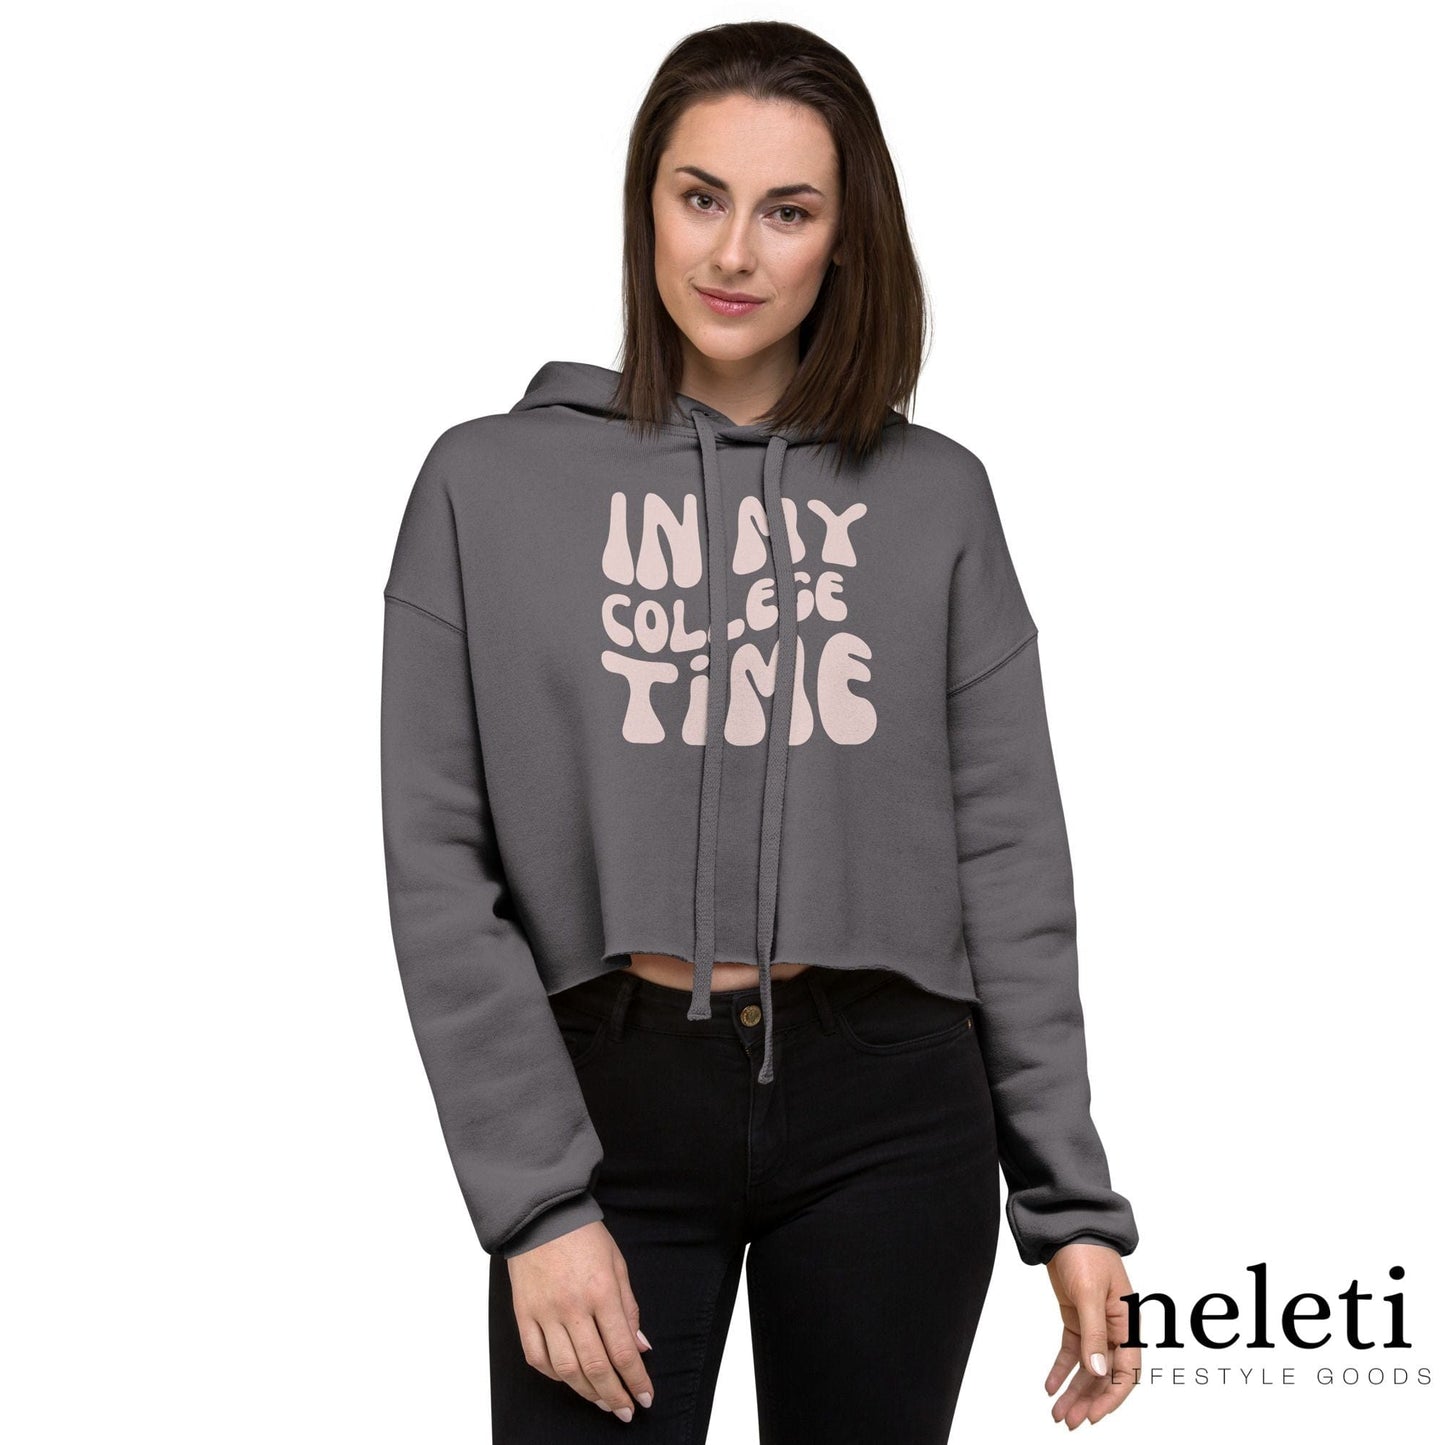    neleti.com-crop-hoodie-in-storm-color-for-college-student